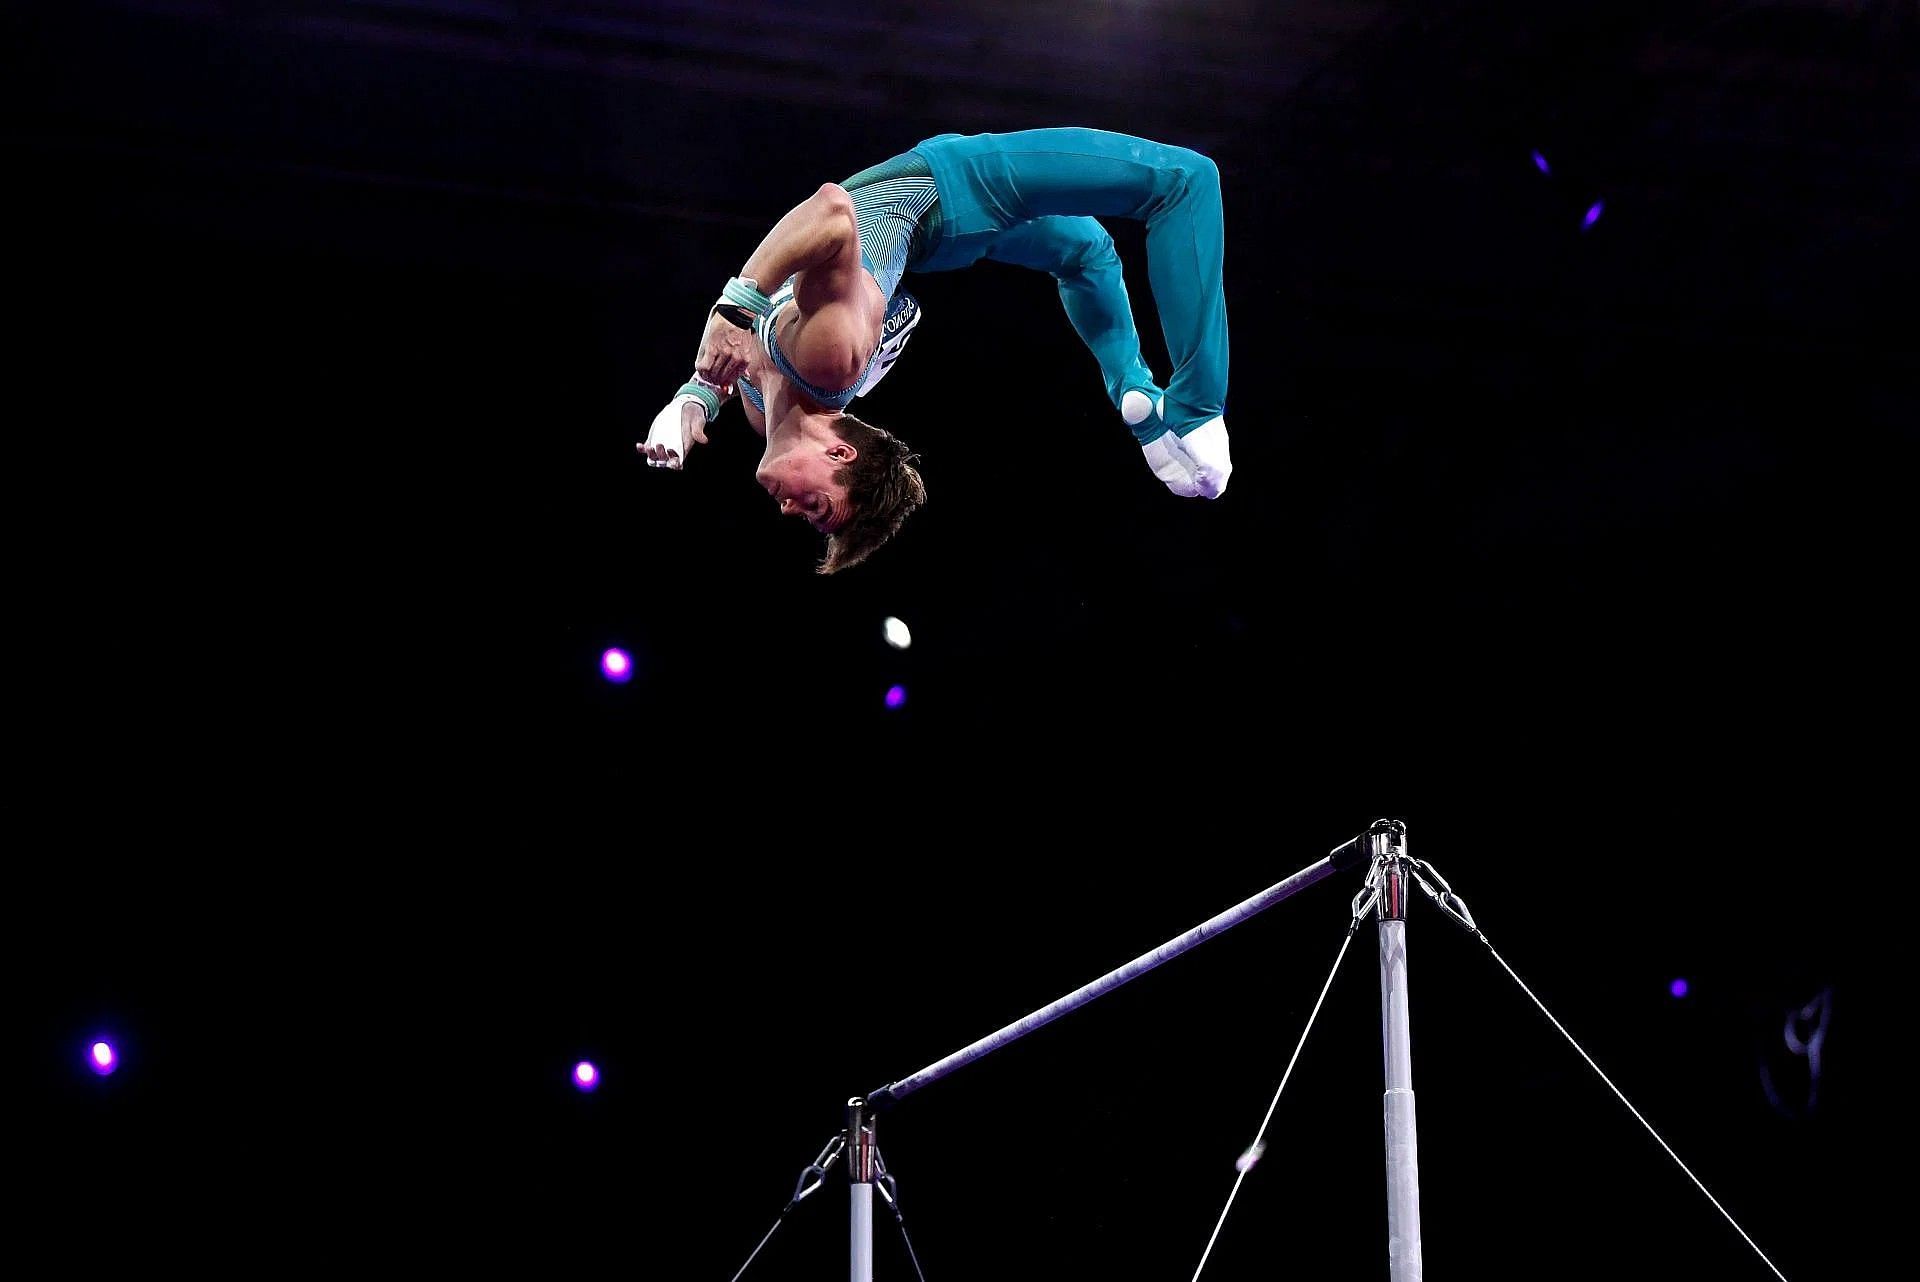 World Artistic Gymnastics Championship 2022 (Image via Getty Images/Laurence Griffiths)